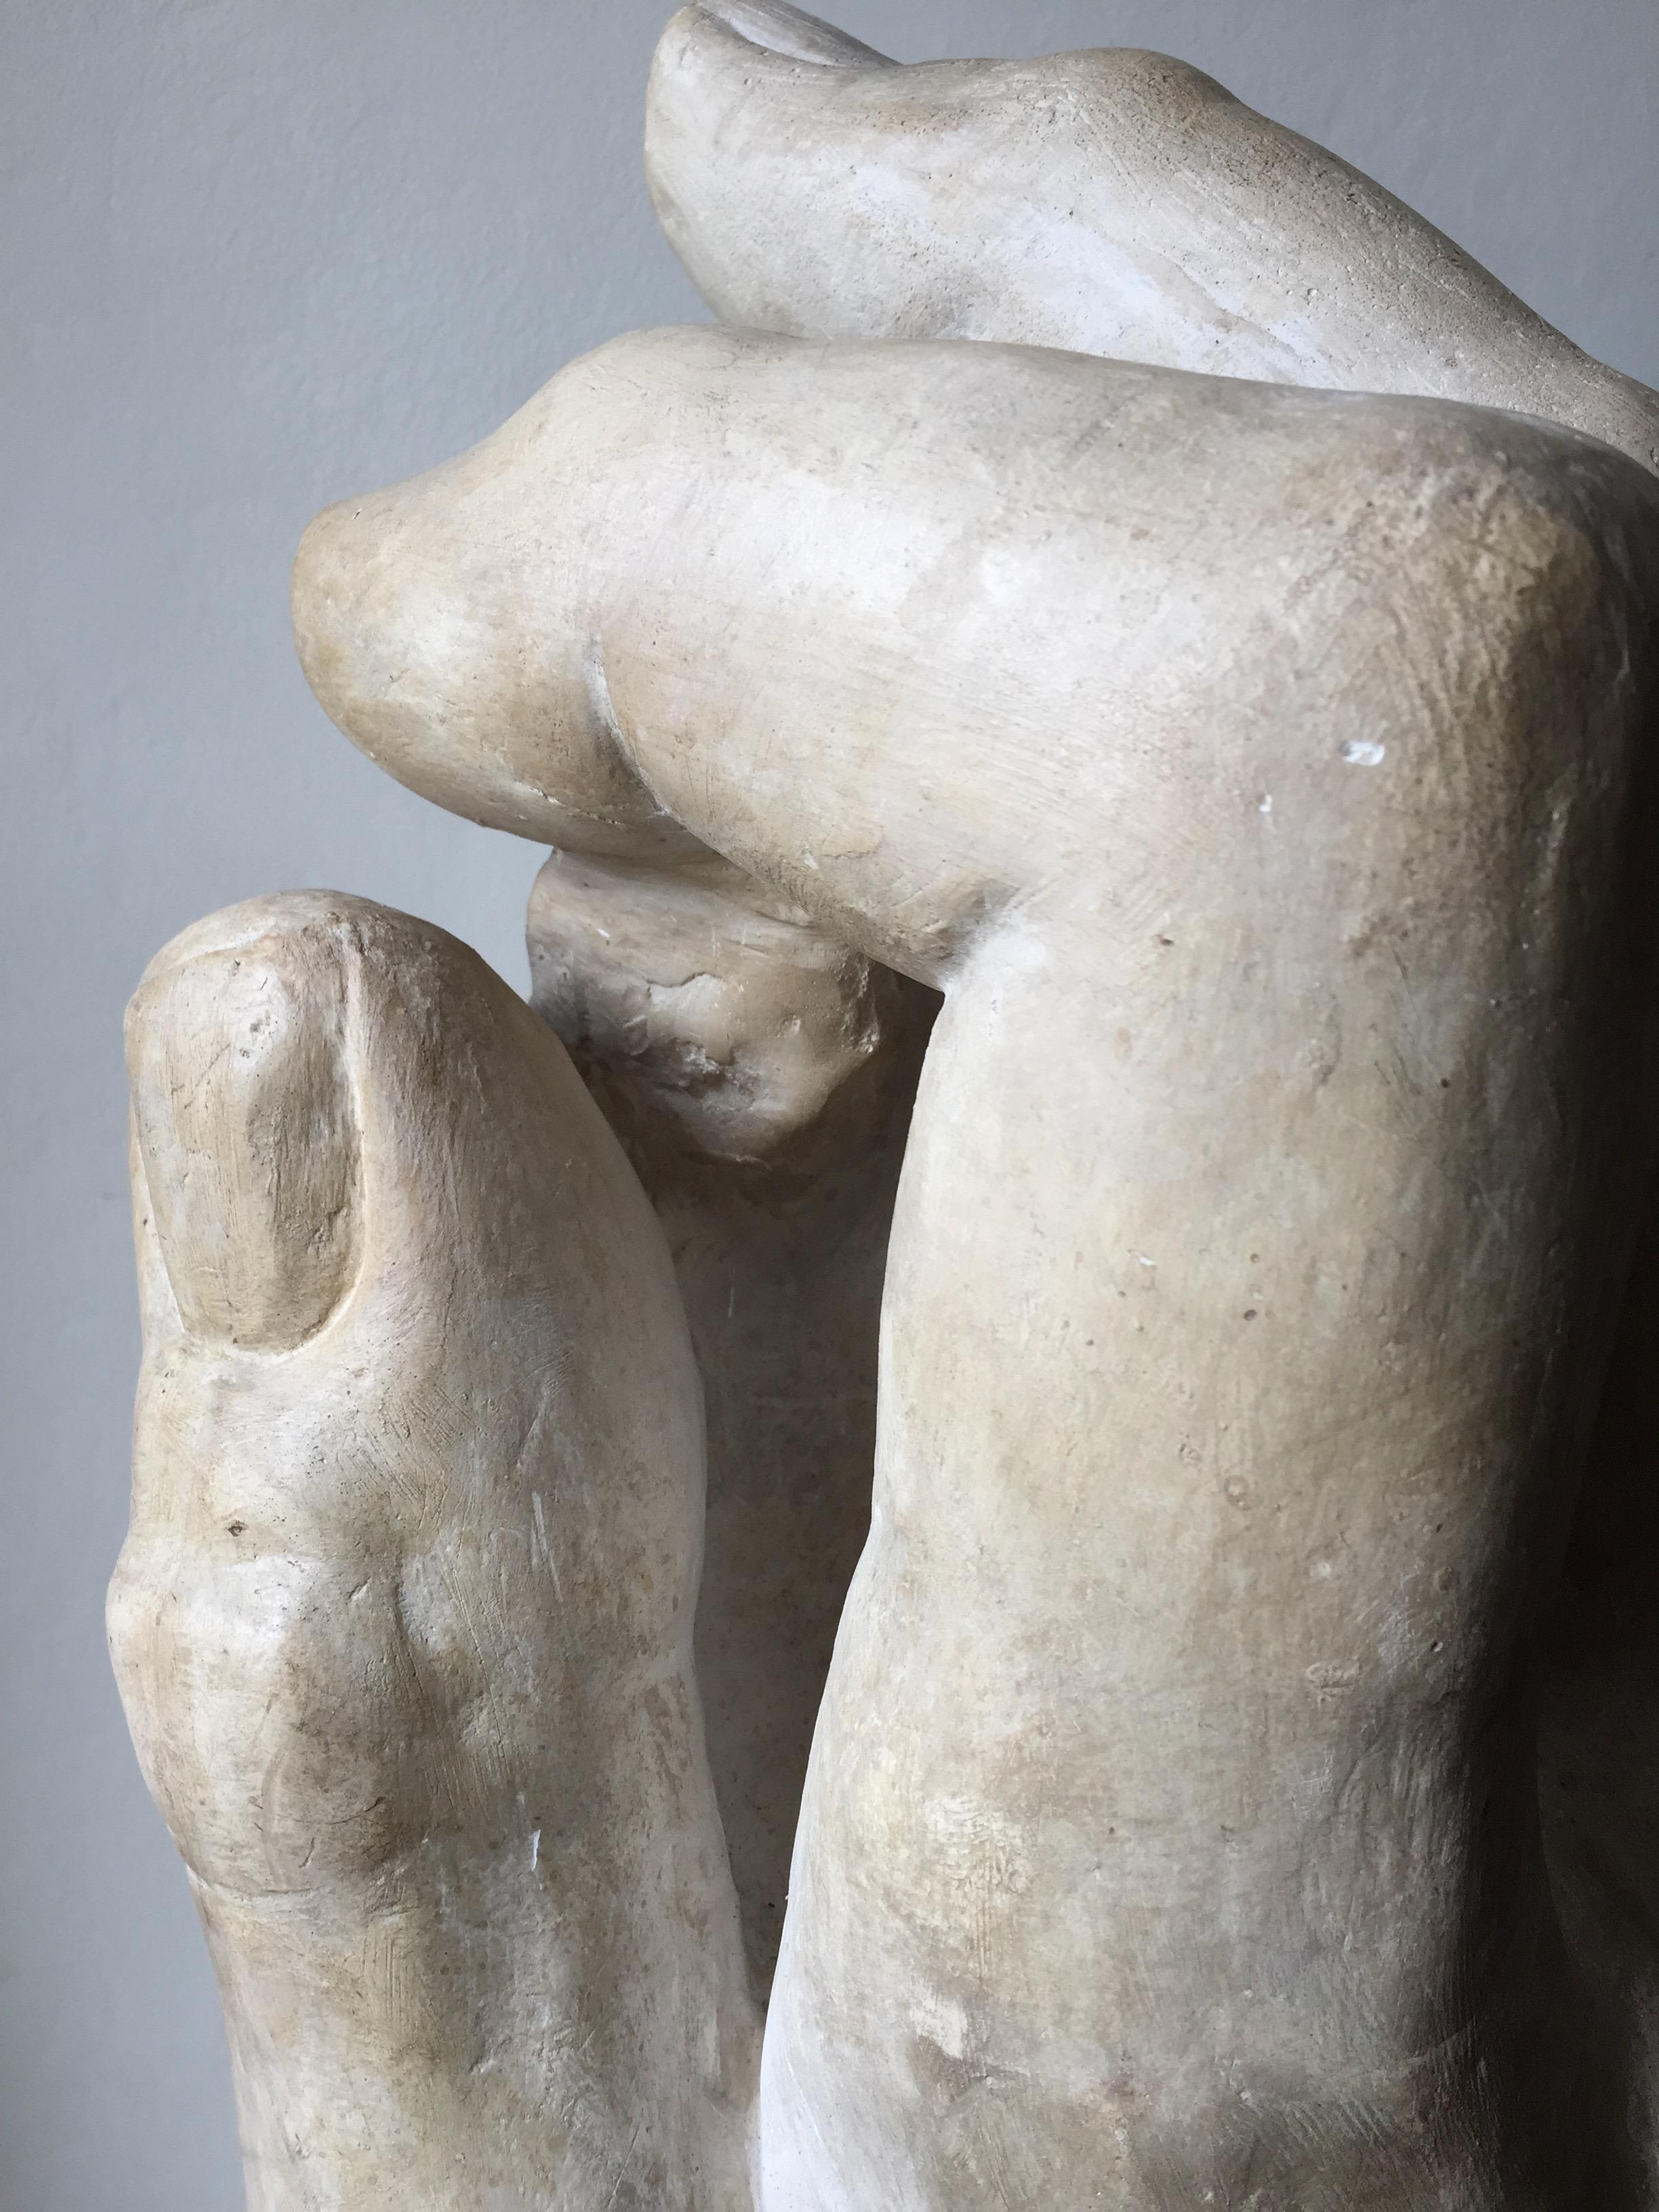 20th Century 1:1 Scale Plaster Right Hand of Michelangelo's David